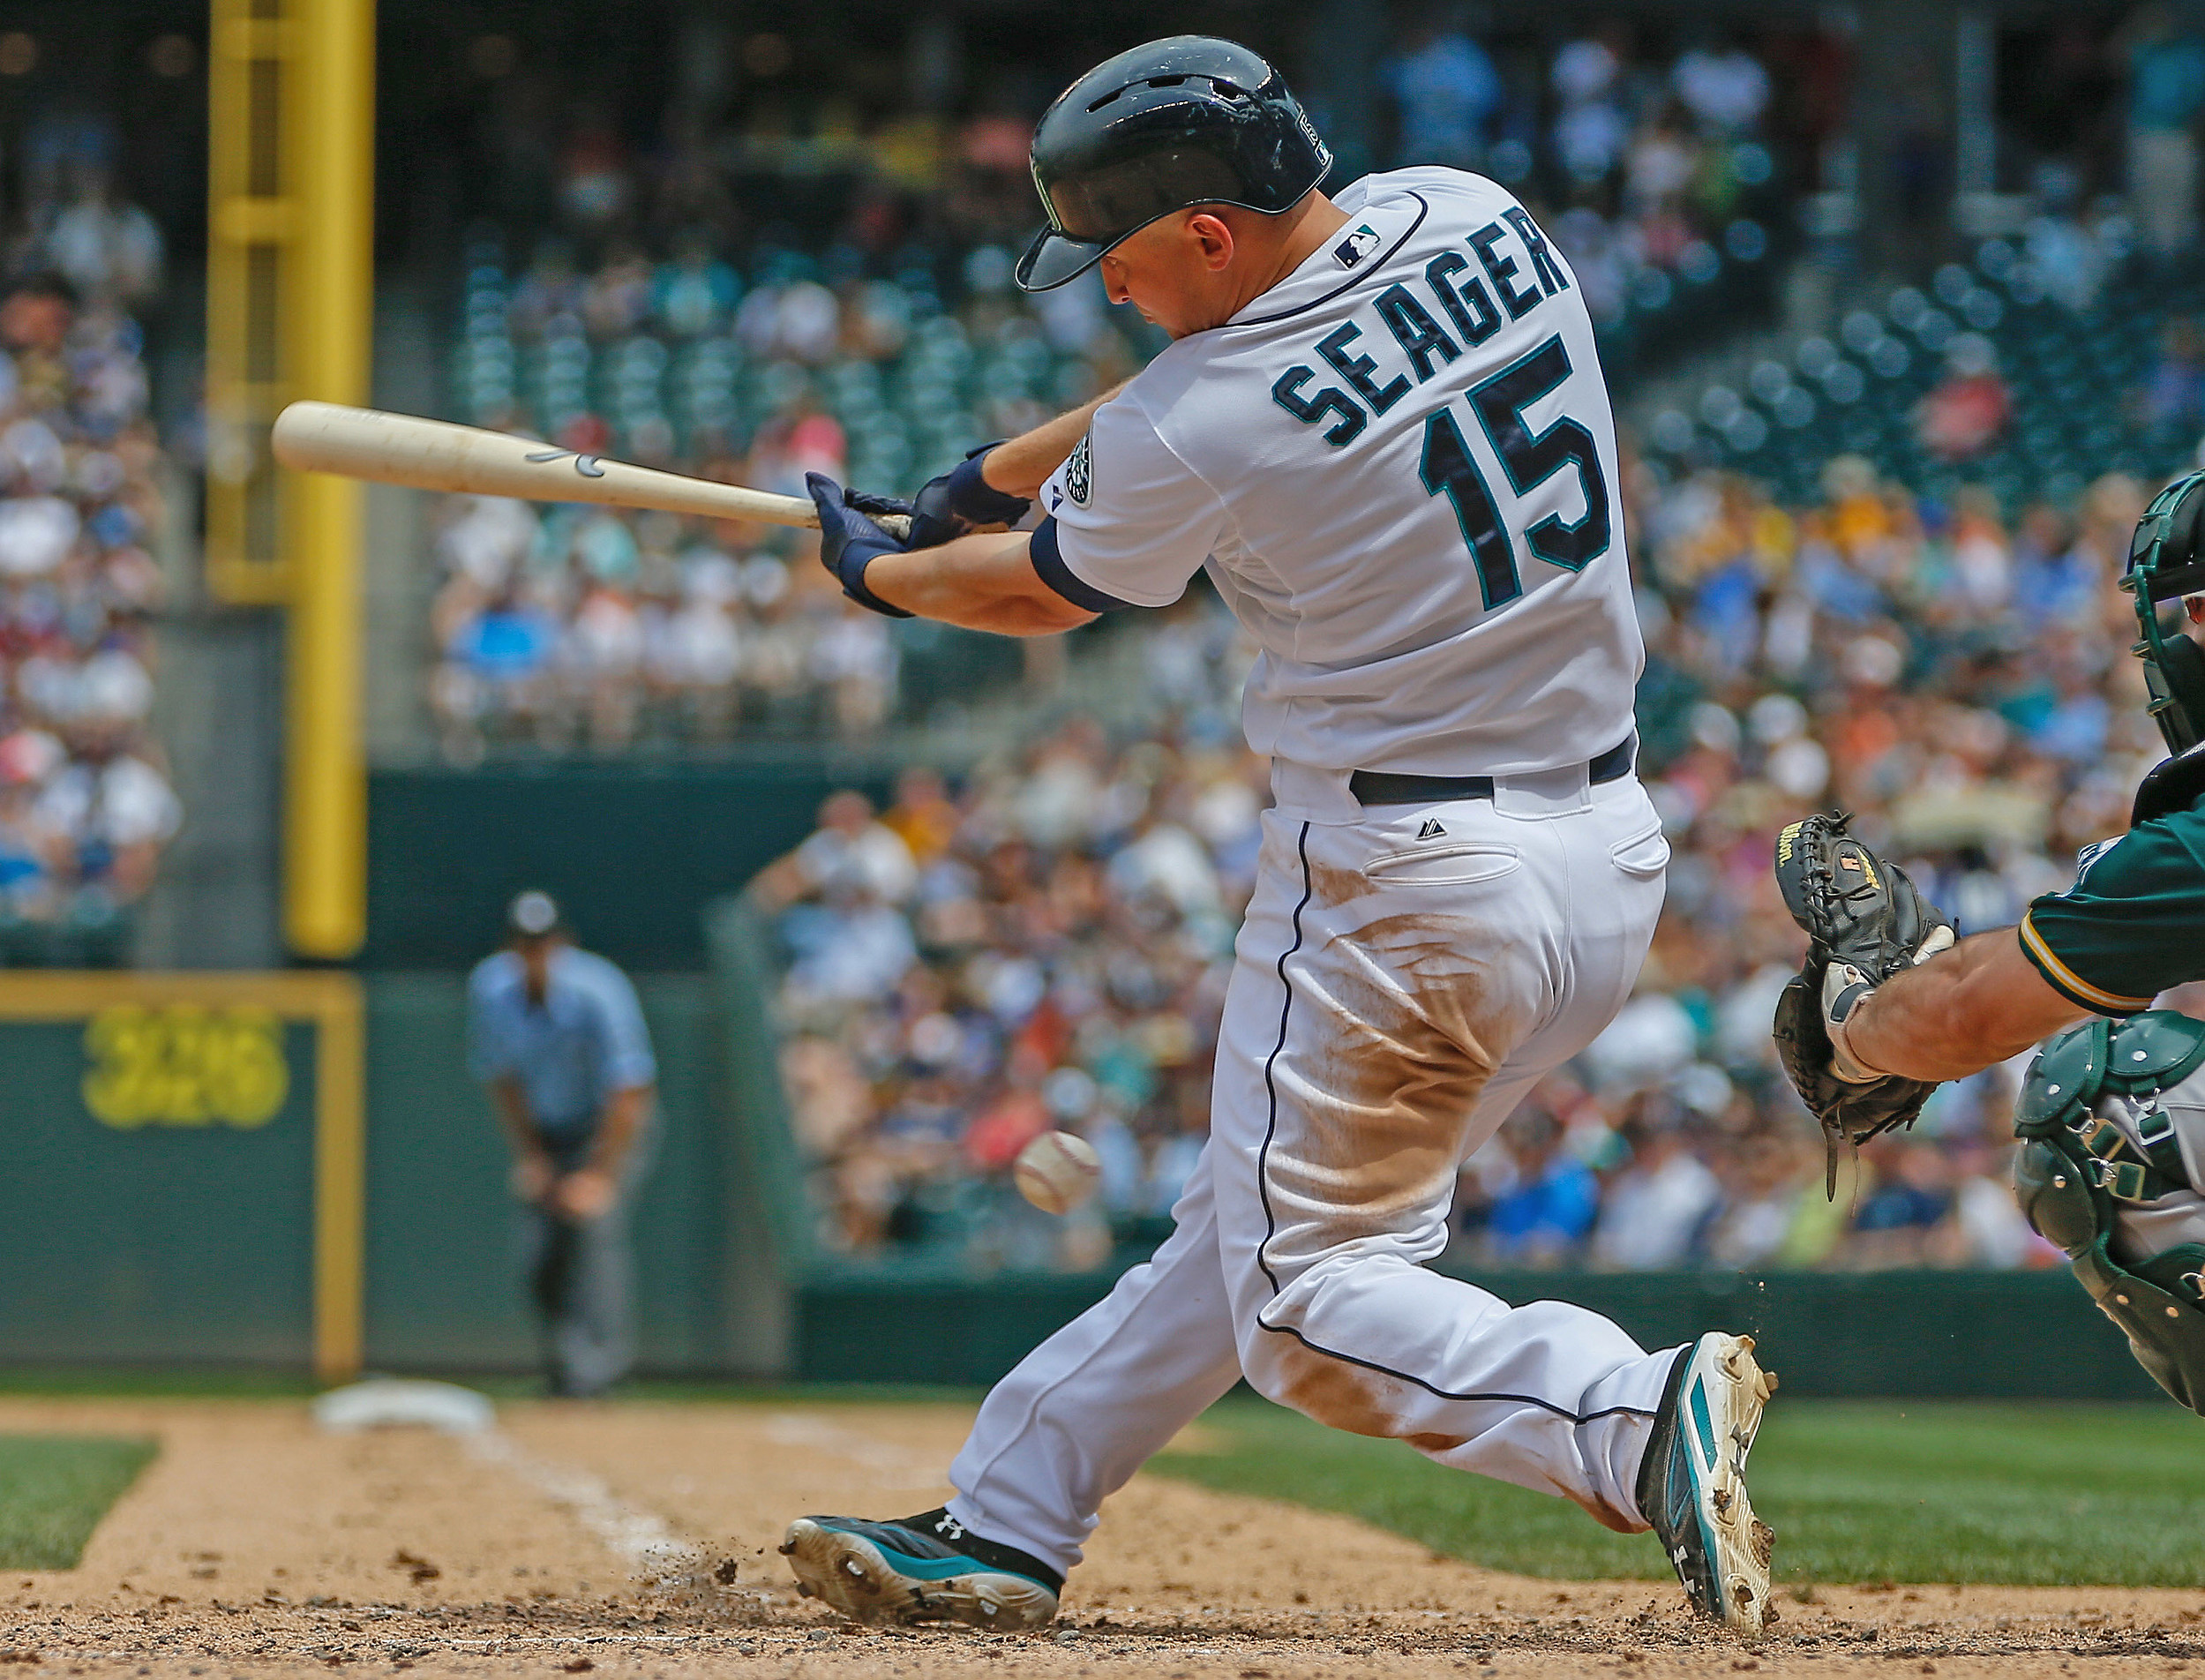 Seager retiring from baseball after 11 seasons with Seattle Mariners